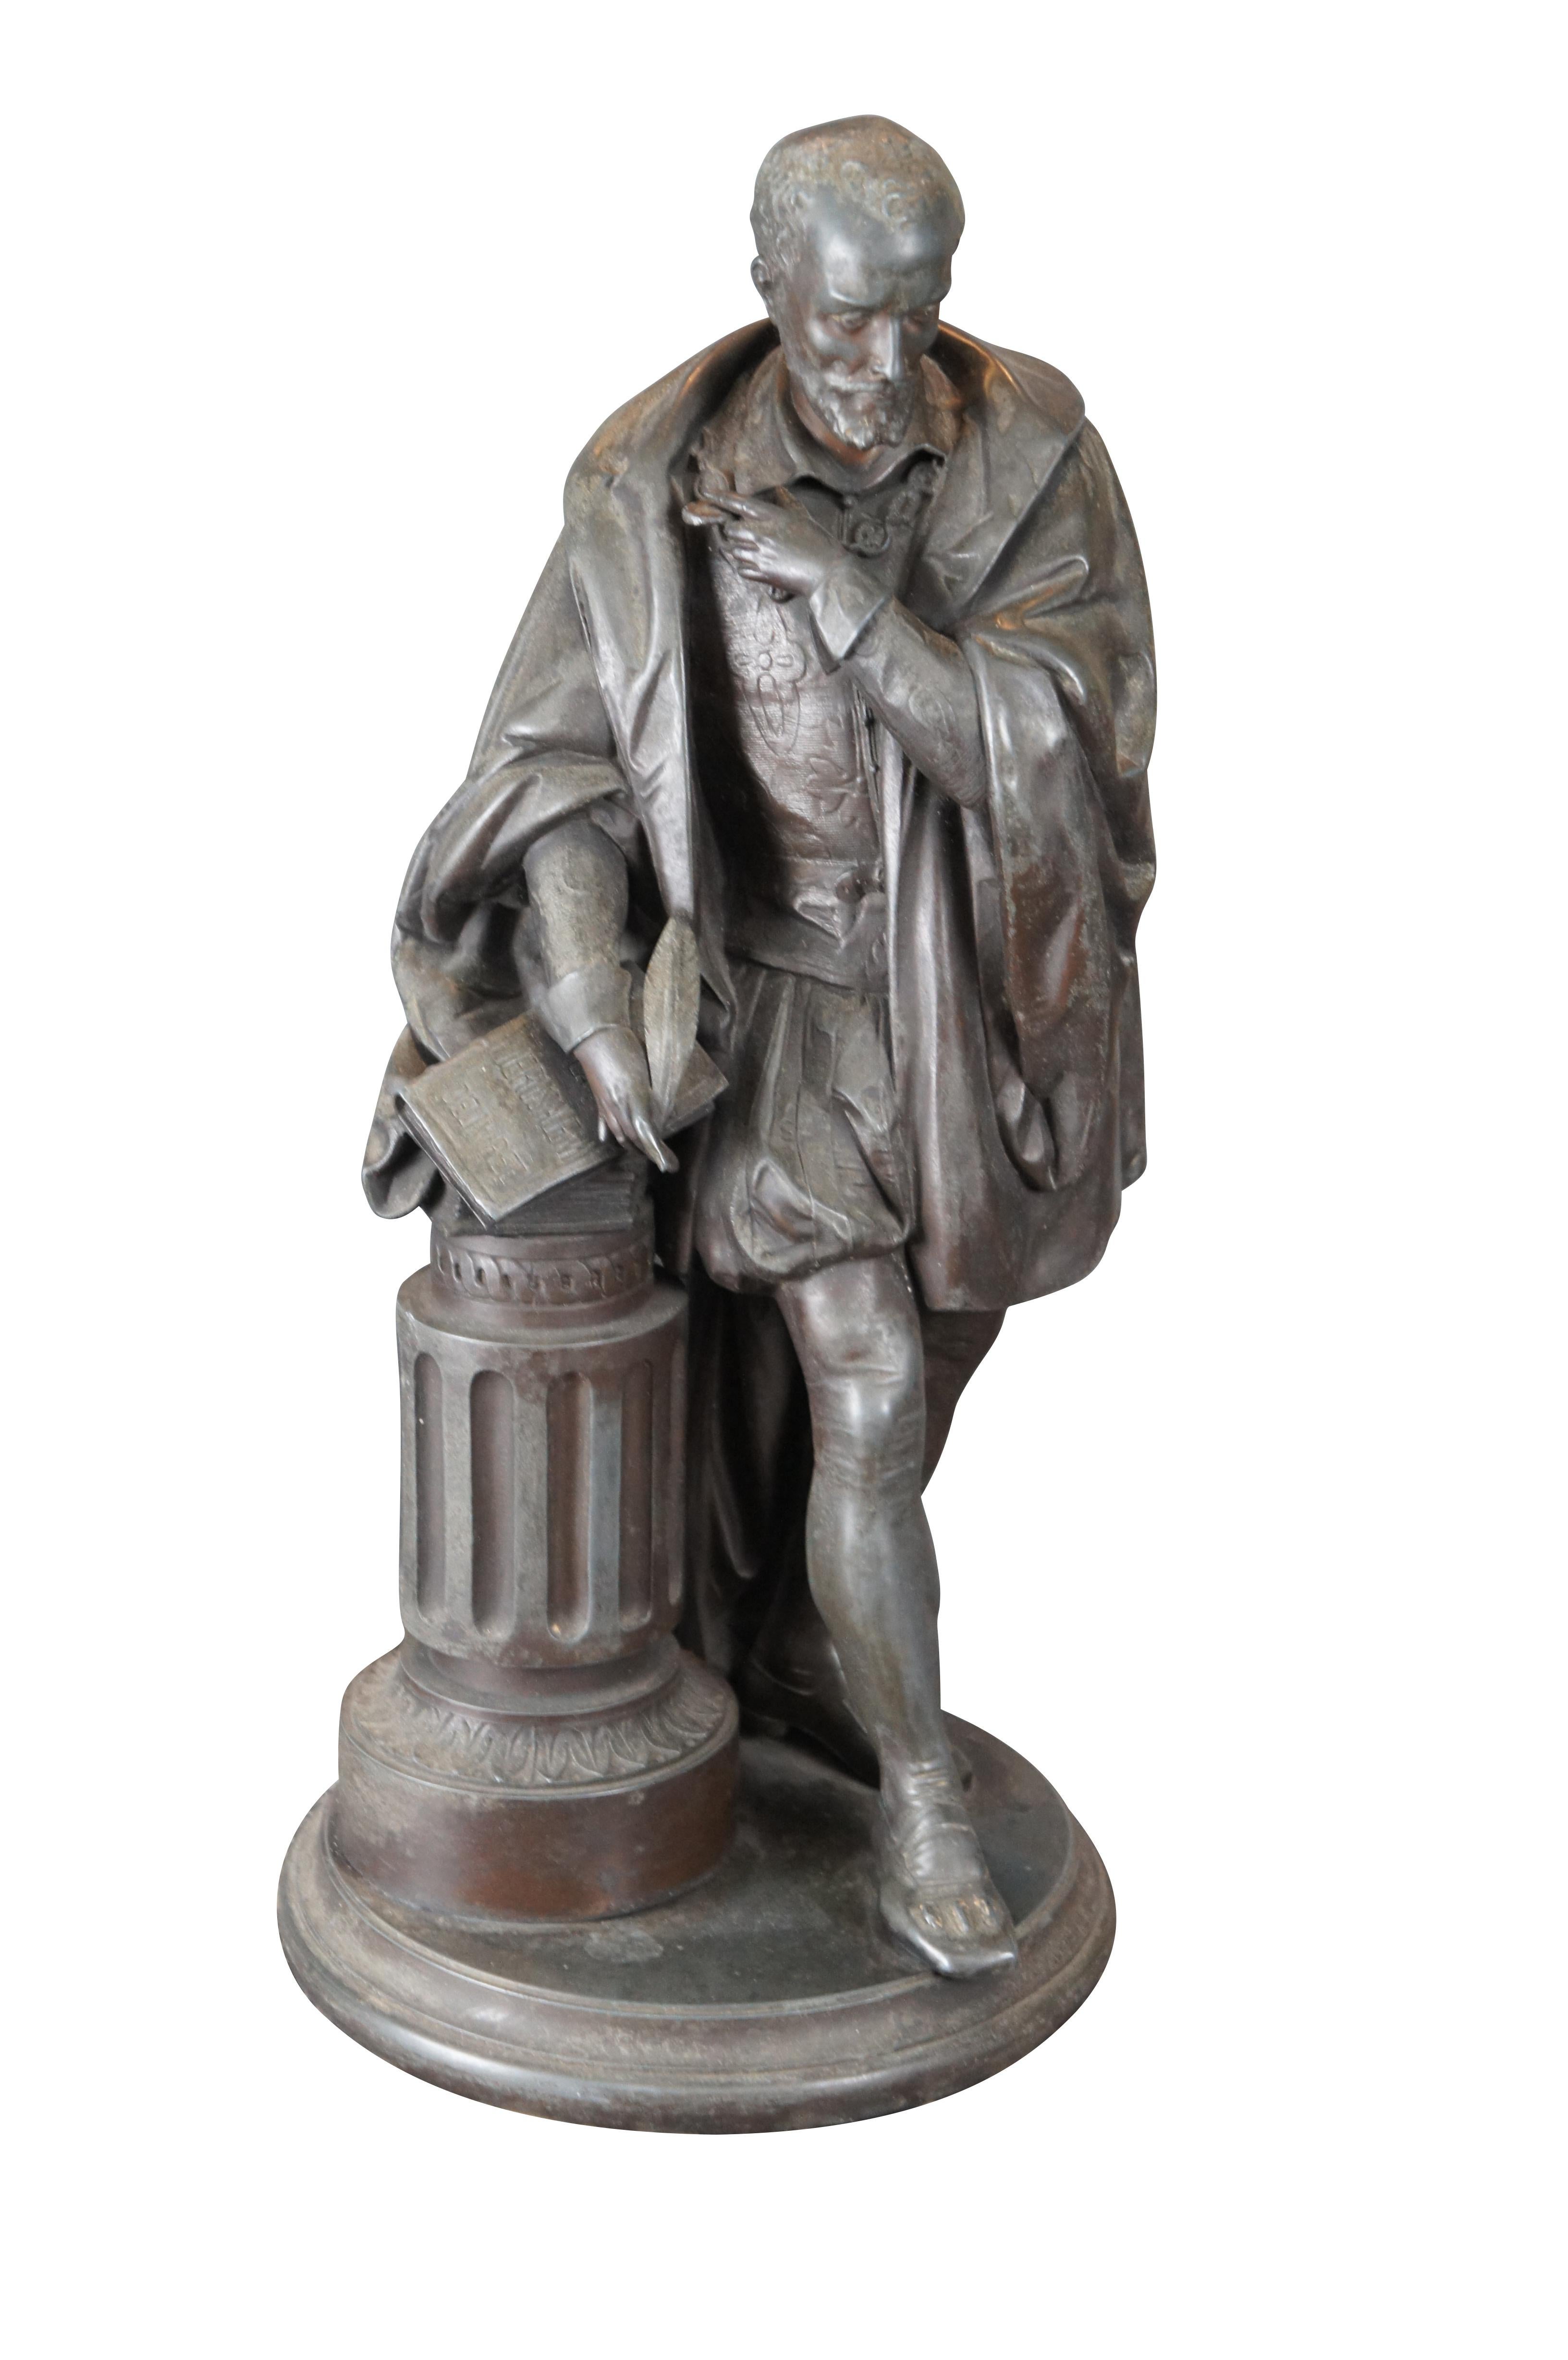 An antique sculpture portraying William Shakespeare leaning over a Grecian style column with books and a quill in hand. One of the books is marked La Jérusalem délivrée is a 1712 French opera in a prologue and five acts by Duke Philippe II, Duke of